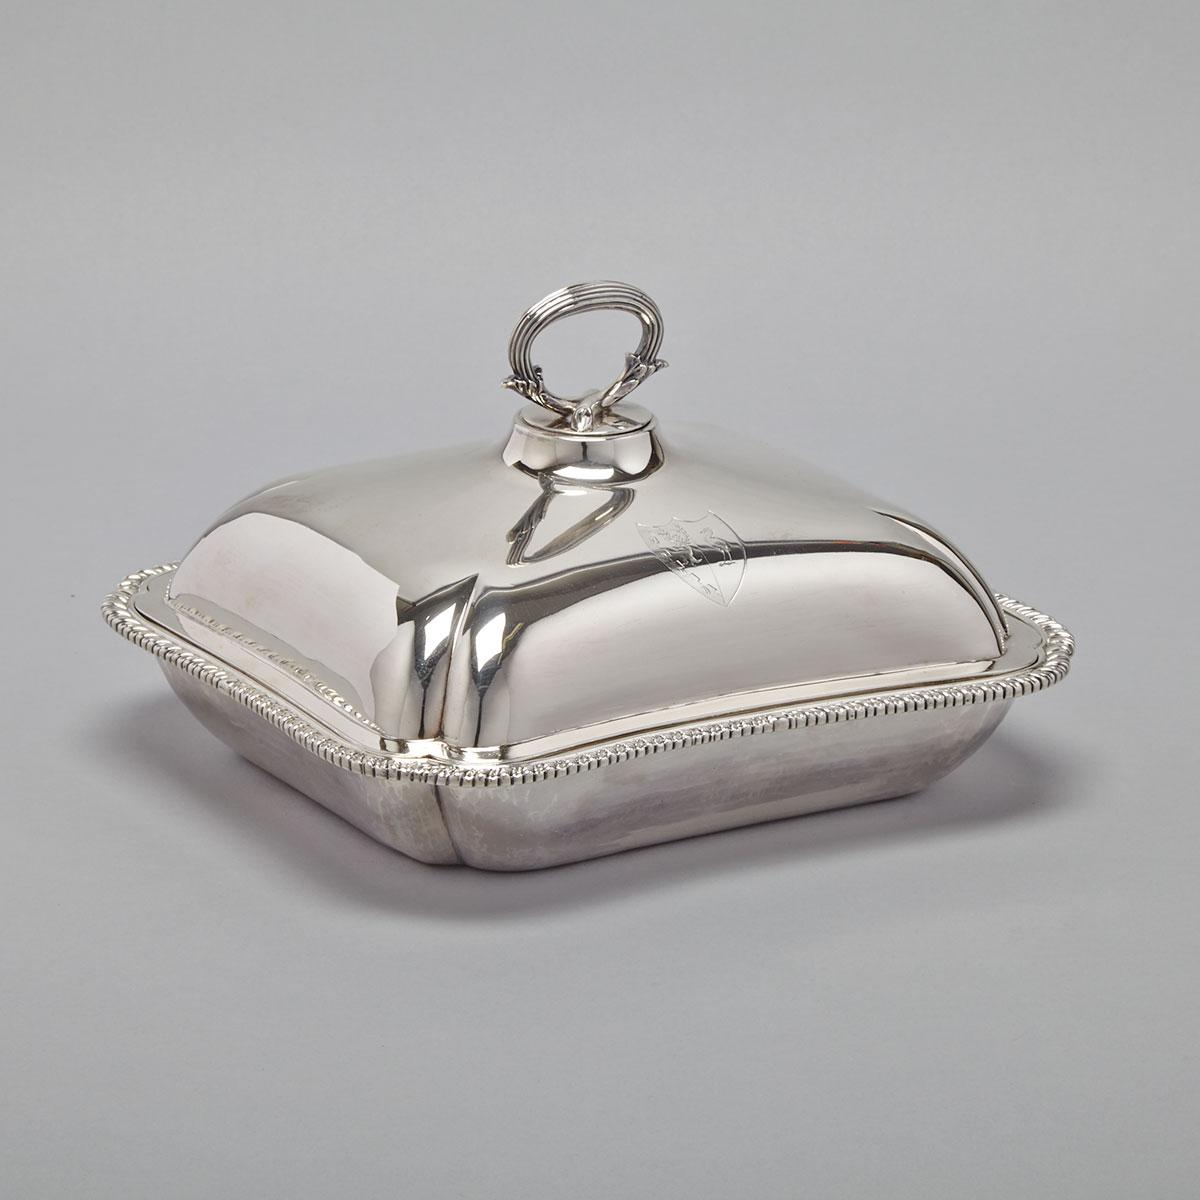 George III Silver Large Entrée Dish and Cover, James Young, London, 1791